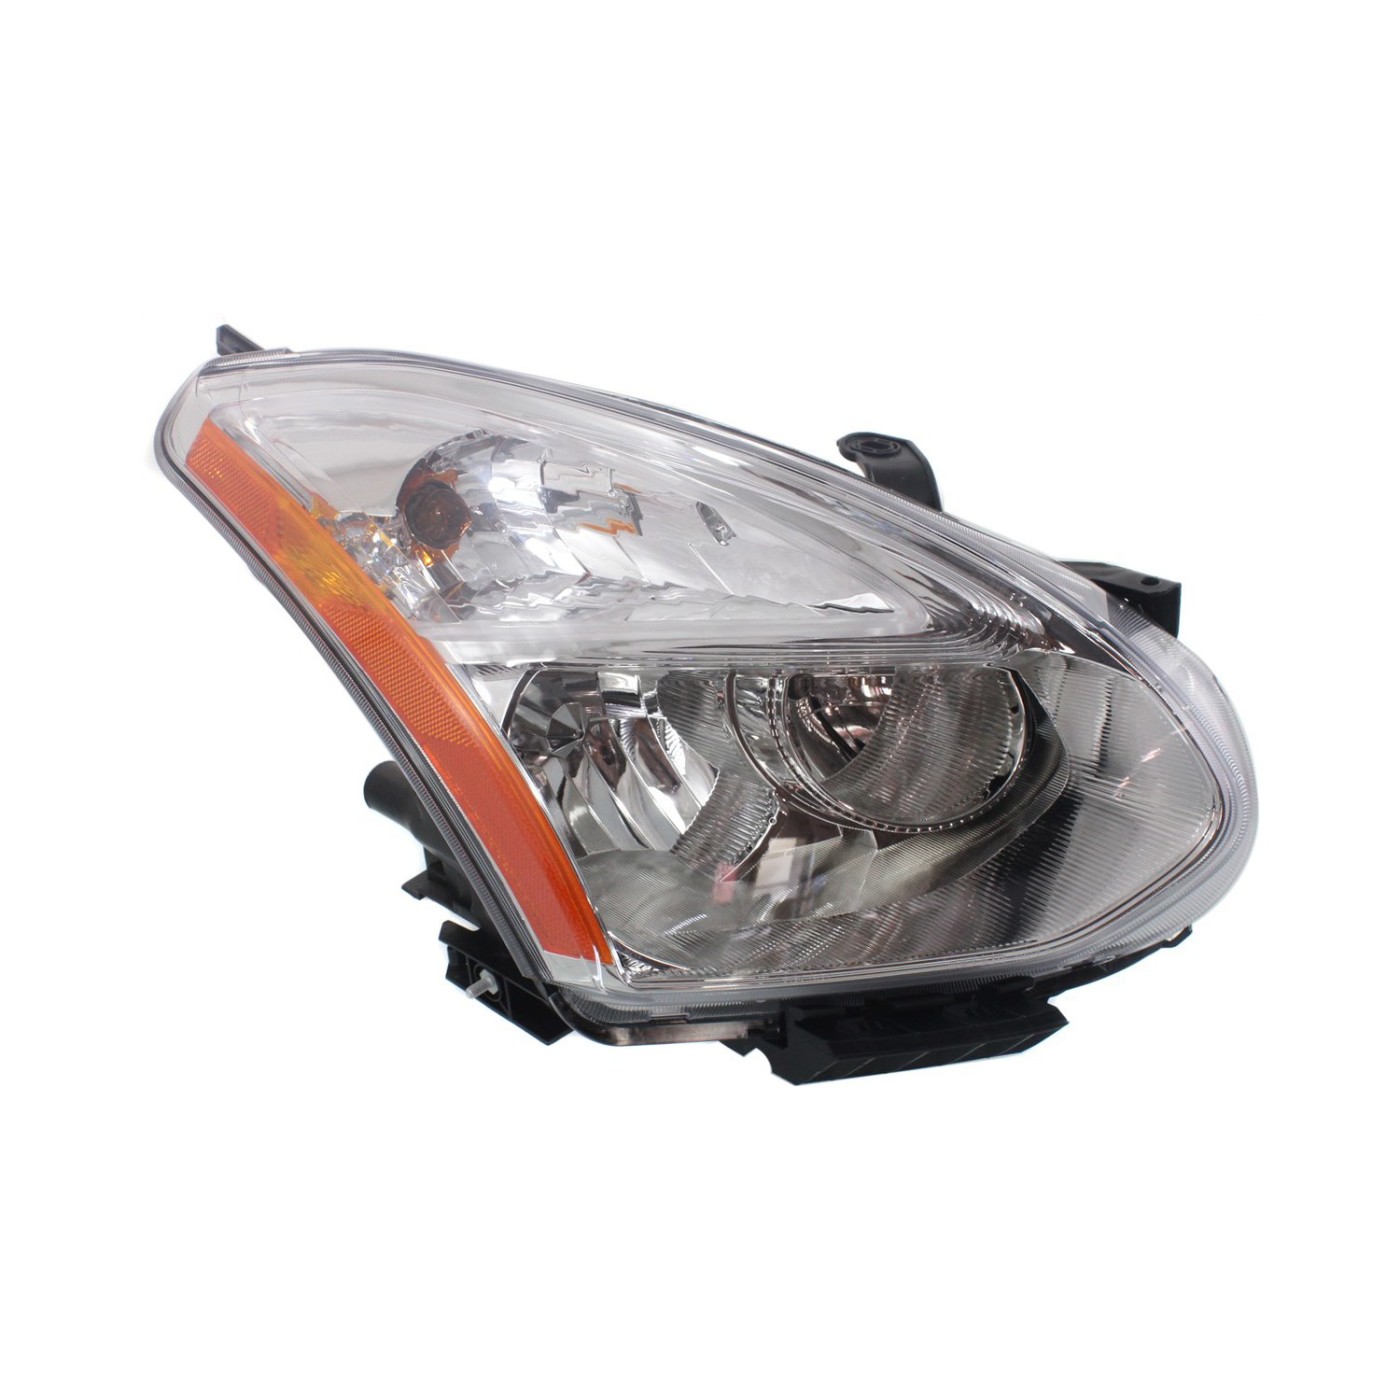 Headlight Set For 2011-2012 Nissan Rogue Left and Right With Bulb 2Pc